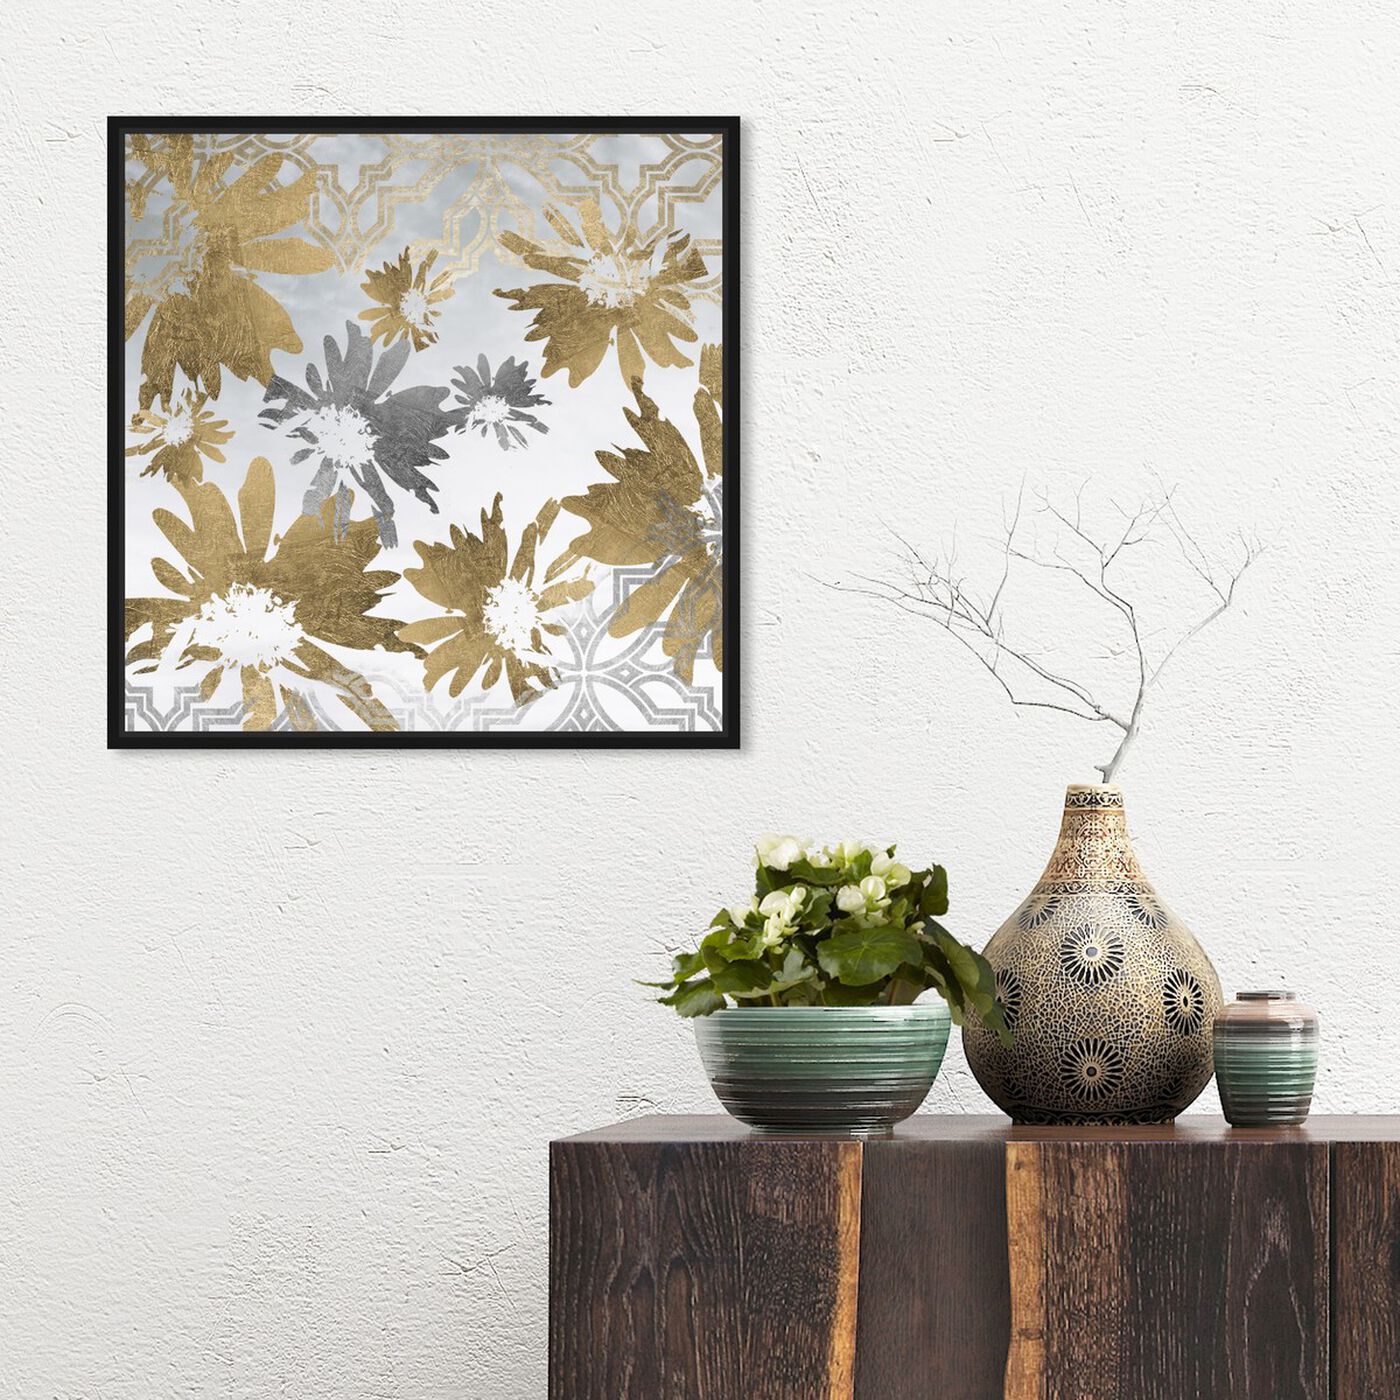 Hanging view of Golden Garden featuring abstract and flowers art.